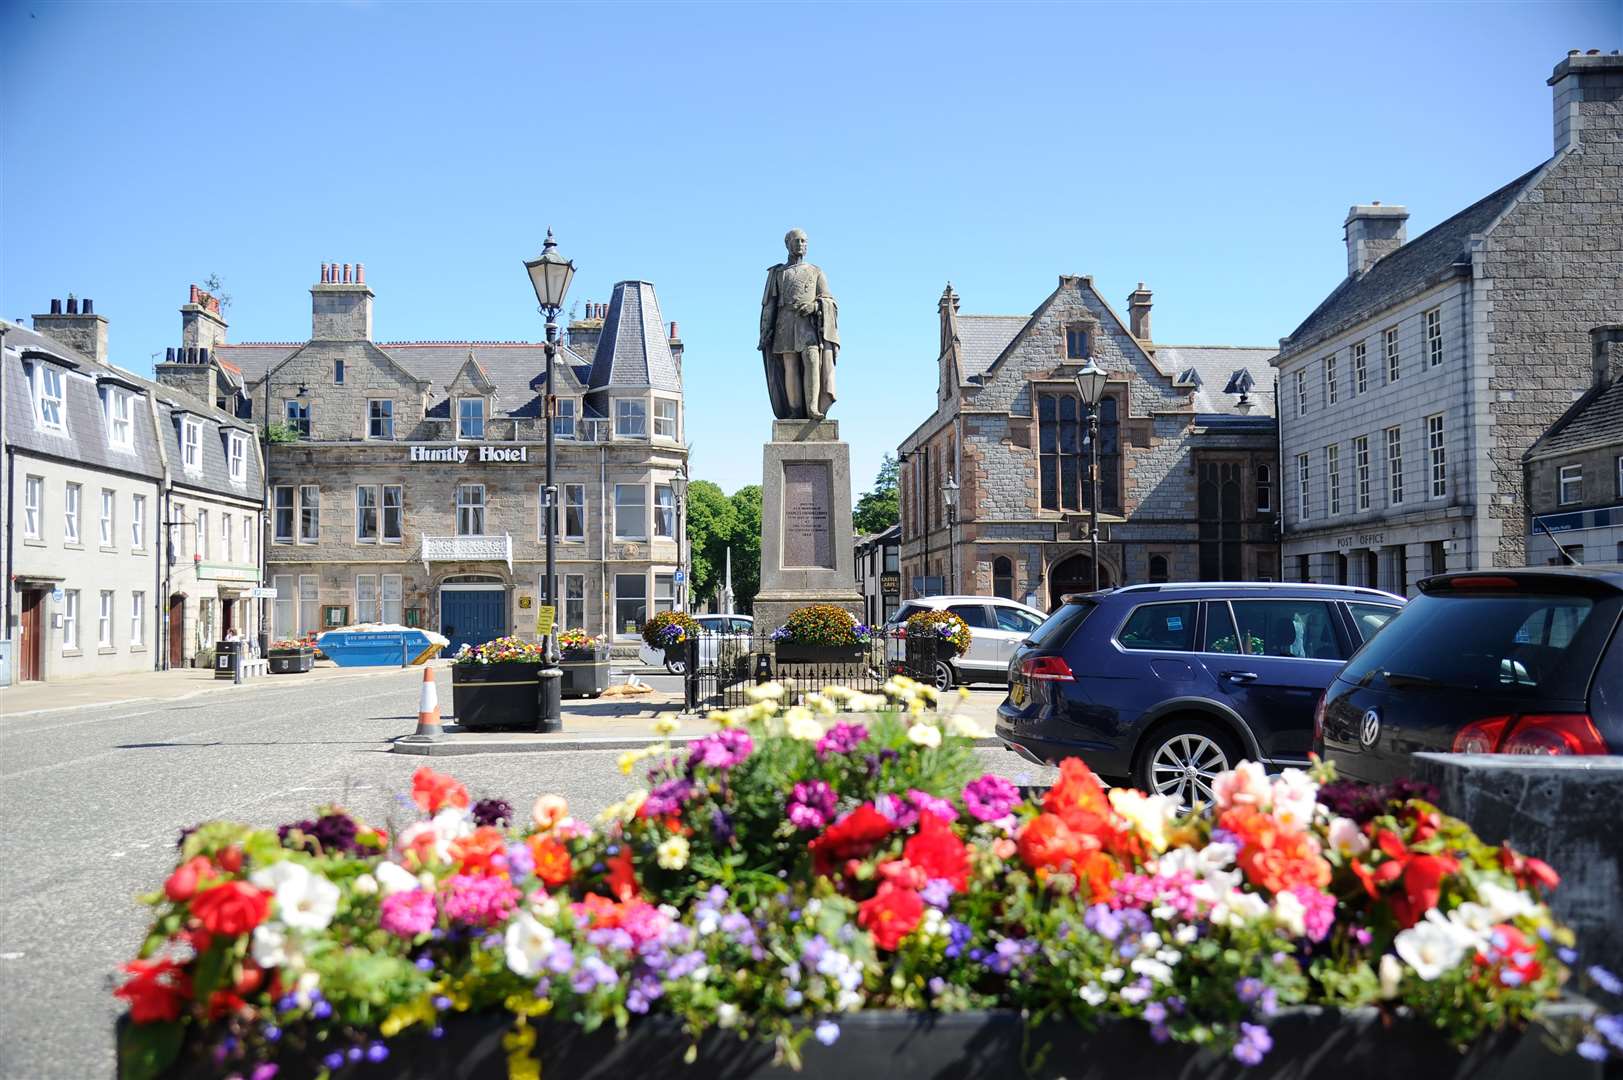 The Square in Huntly will be covered by a CCTV network. Picture: Becky Saunderson.